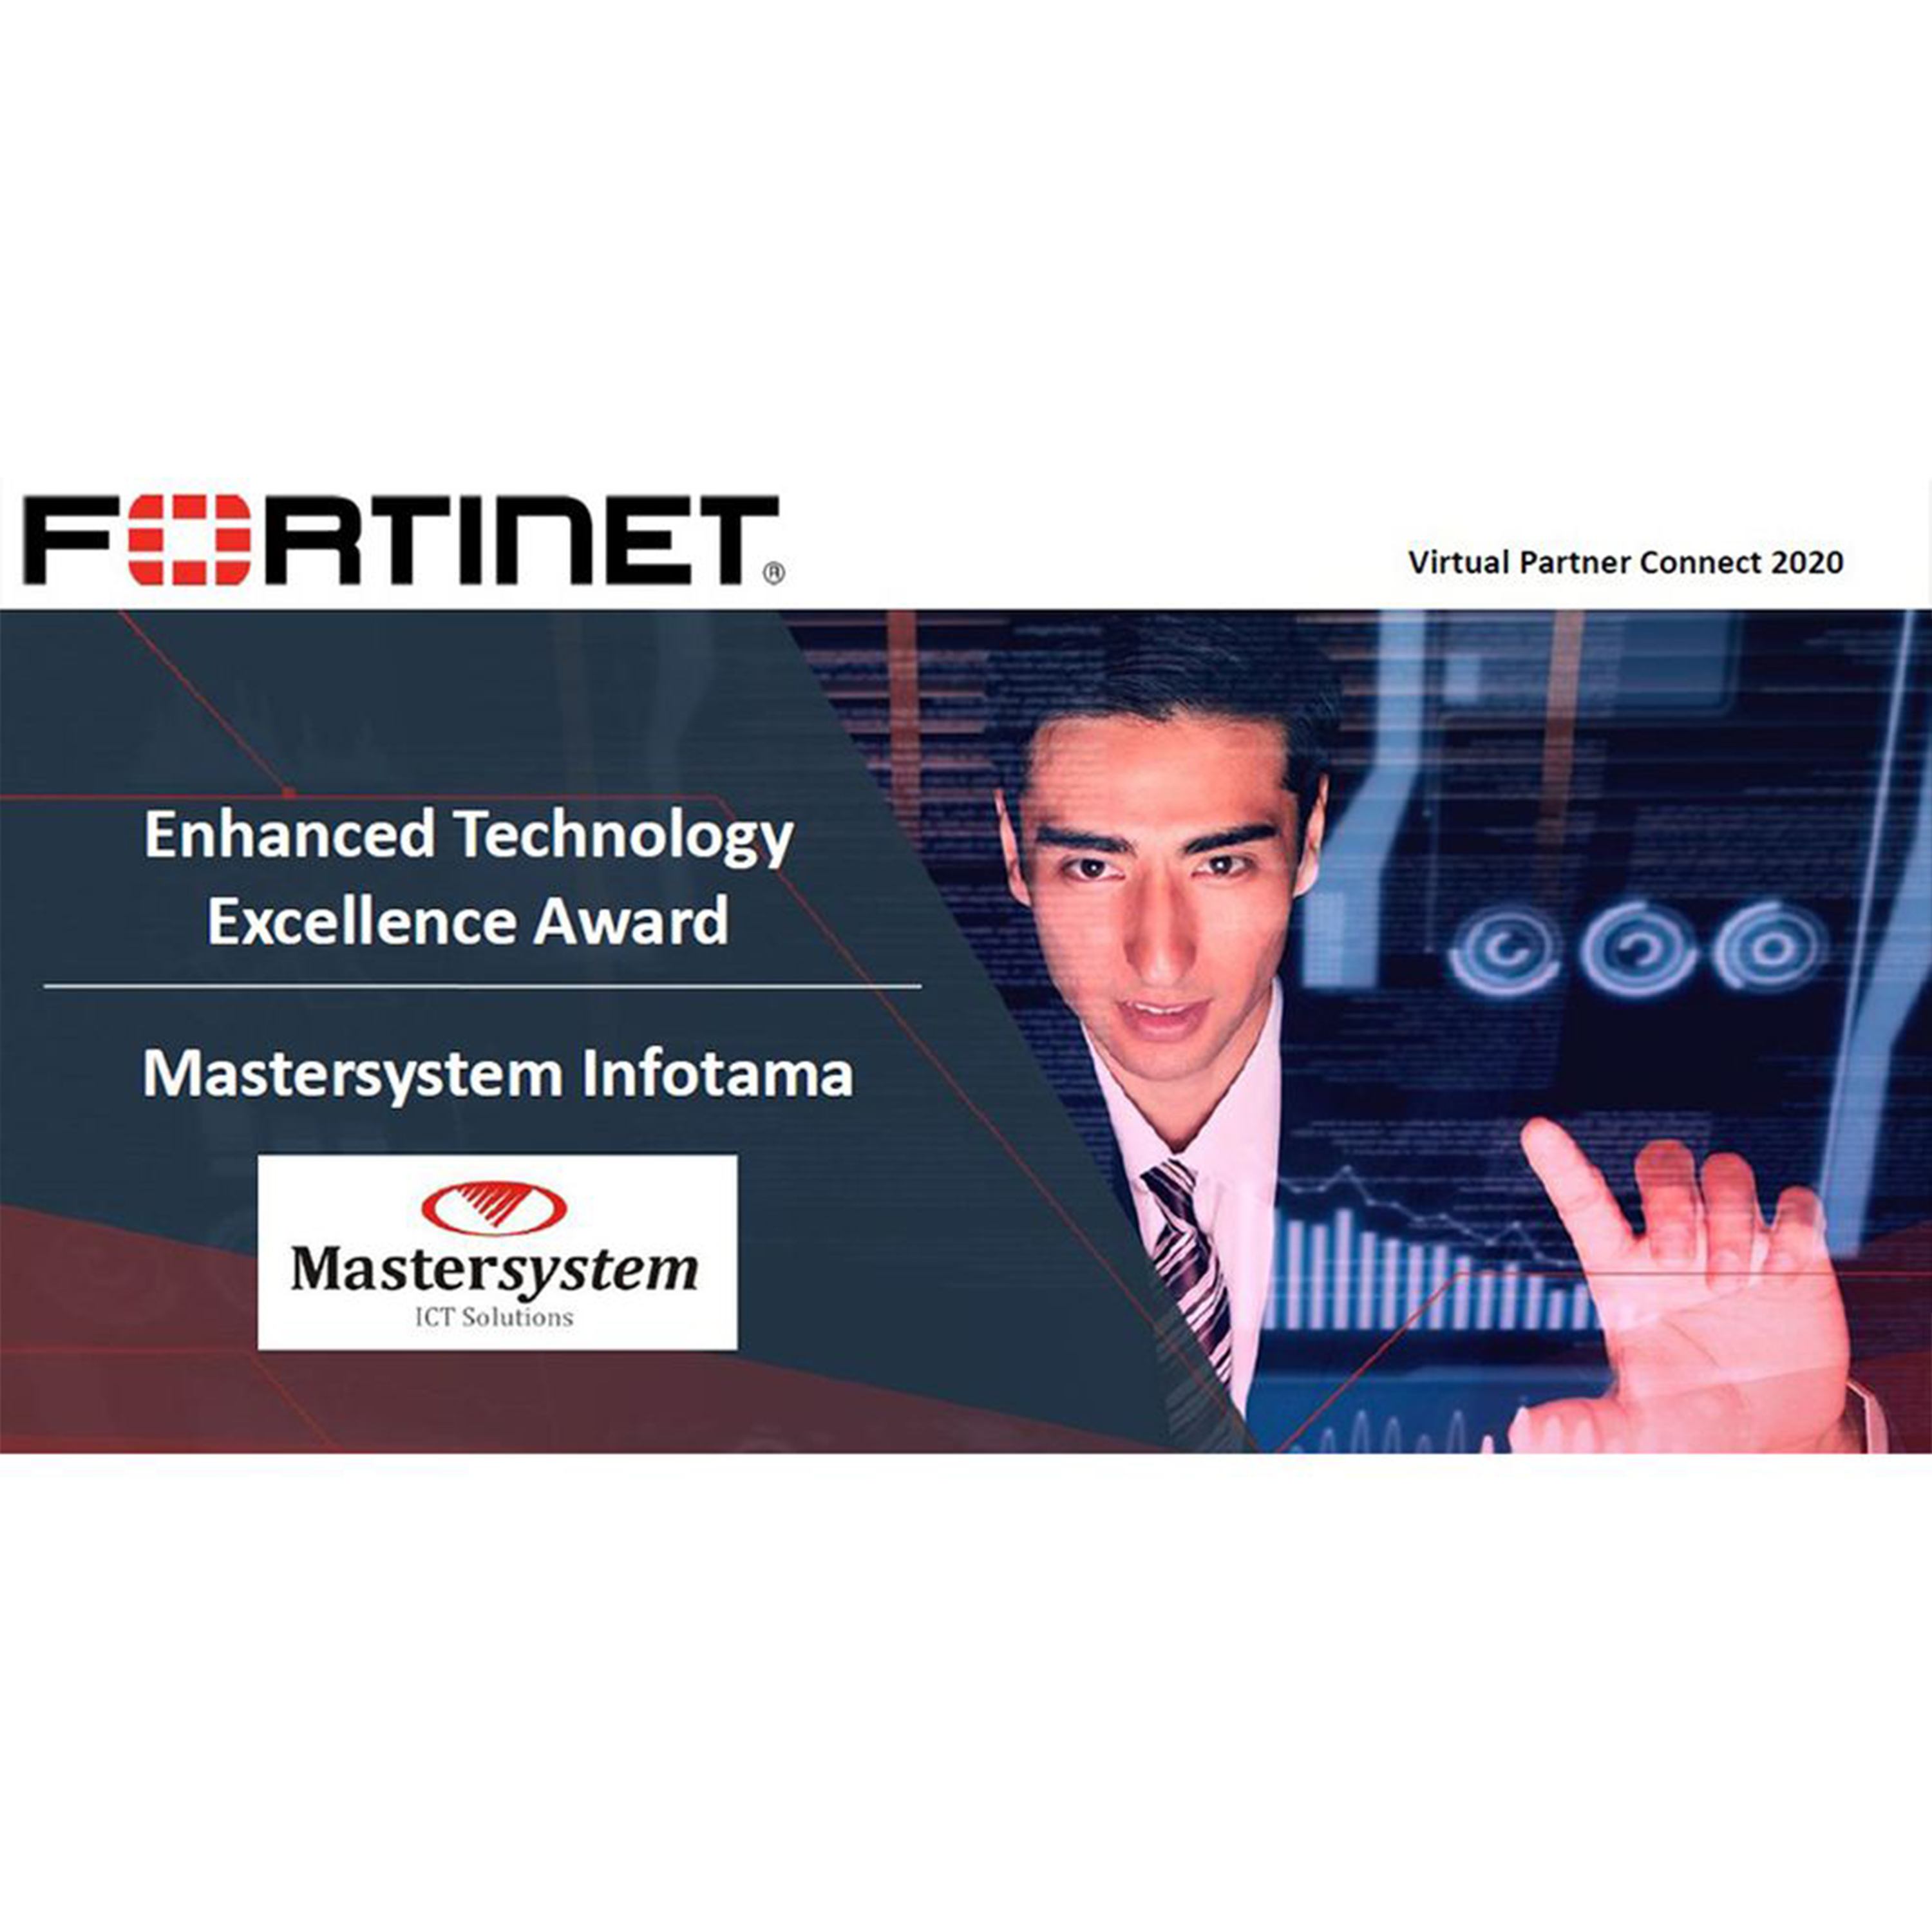 Mastersystem achieved Enhanced Technology Excellence Award in Fortinet Virtual Partner Connect 2020